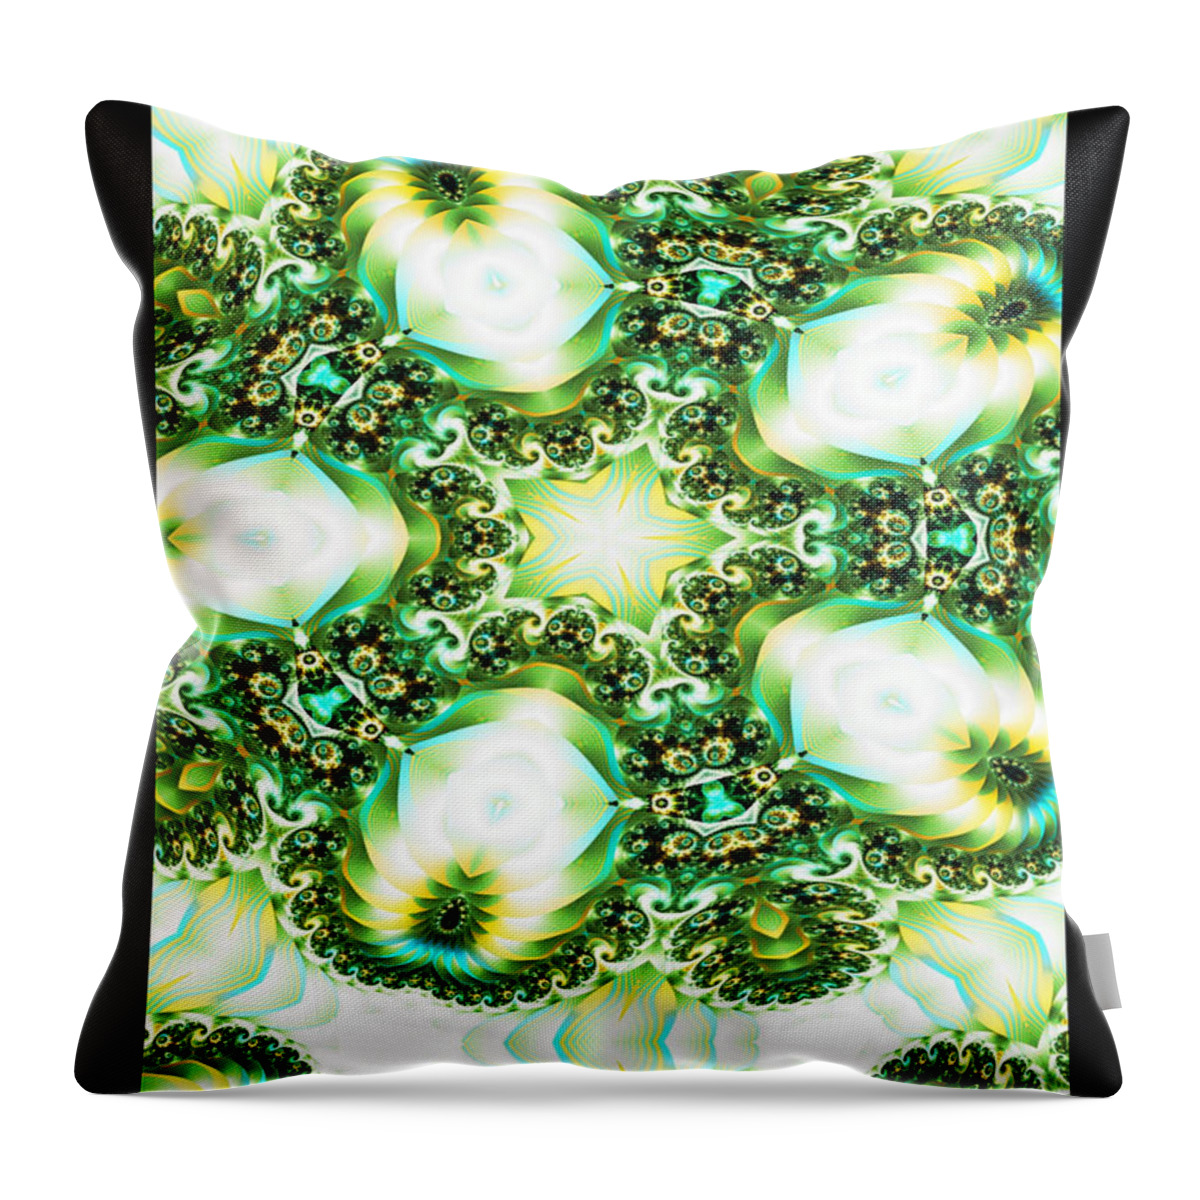 Fractal Throw Pillow featuring the digital art Green Jello by Charmaine Zoe